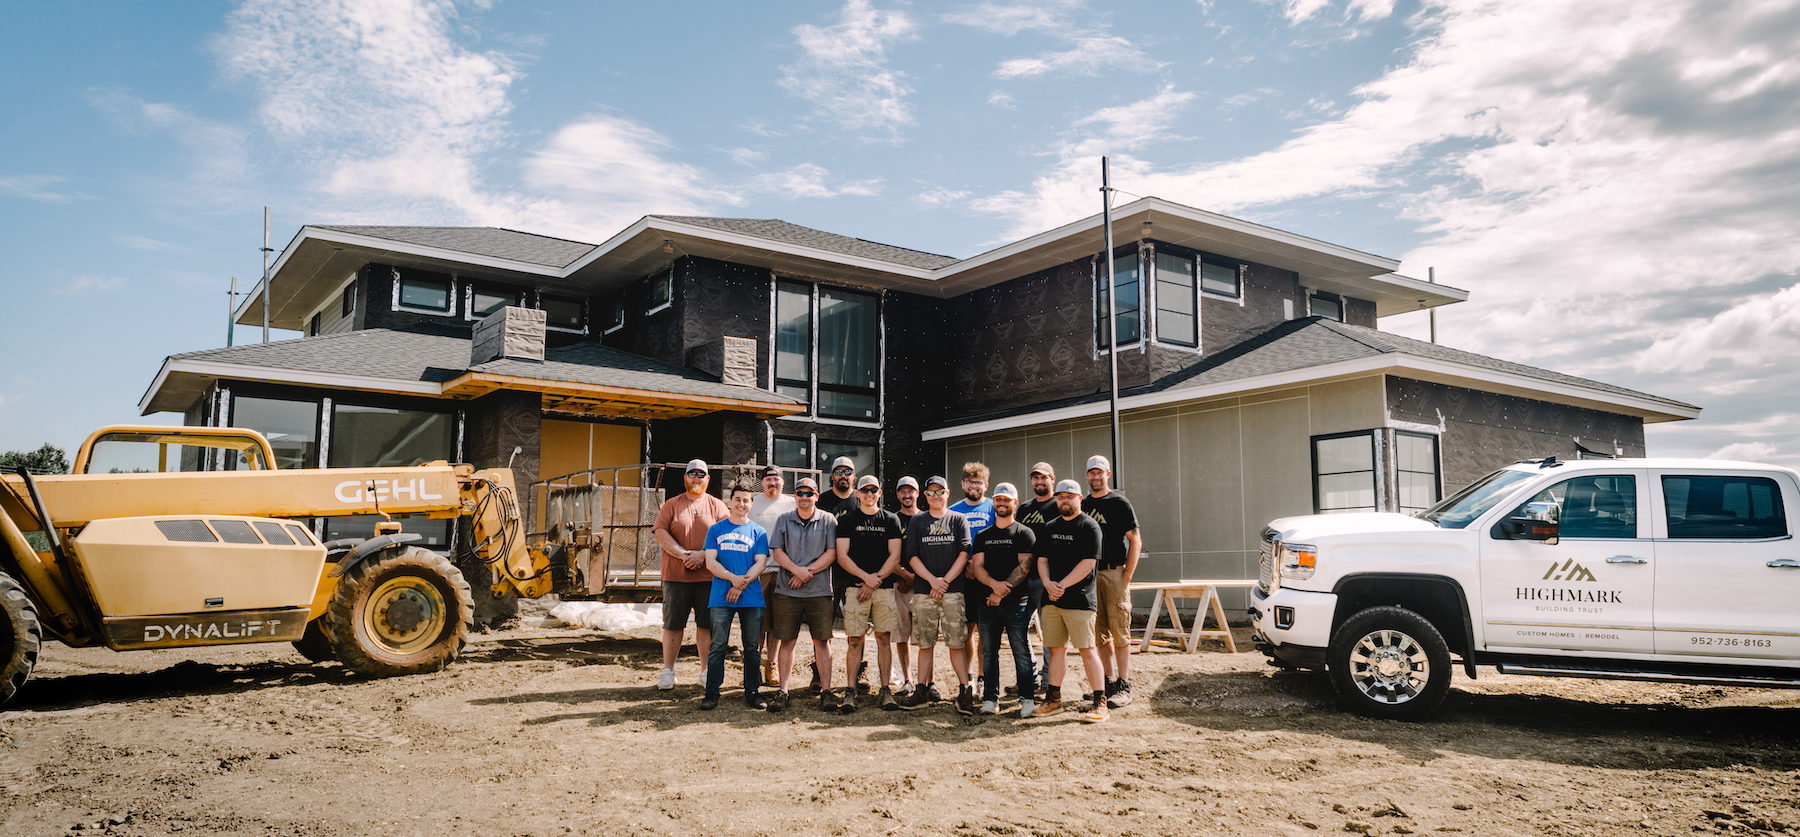 A group of construction workers standing in front of a house.